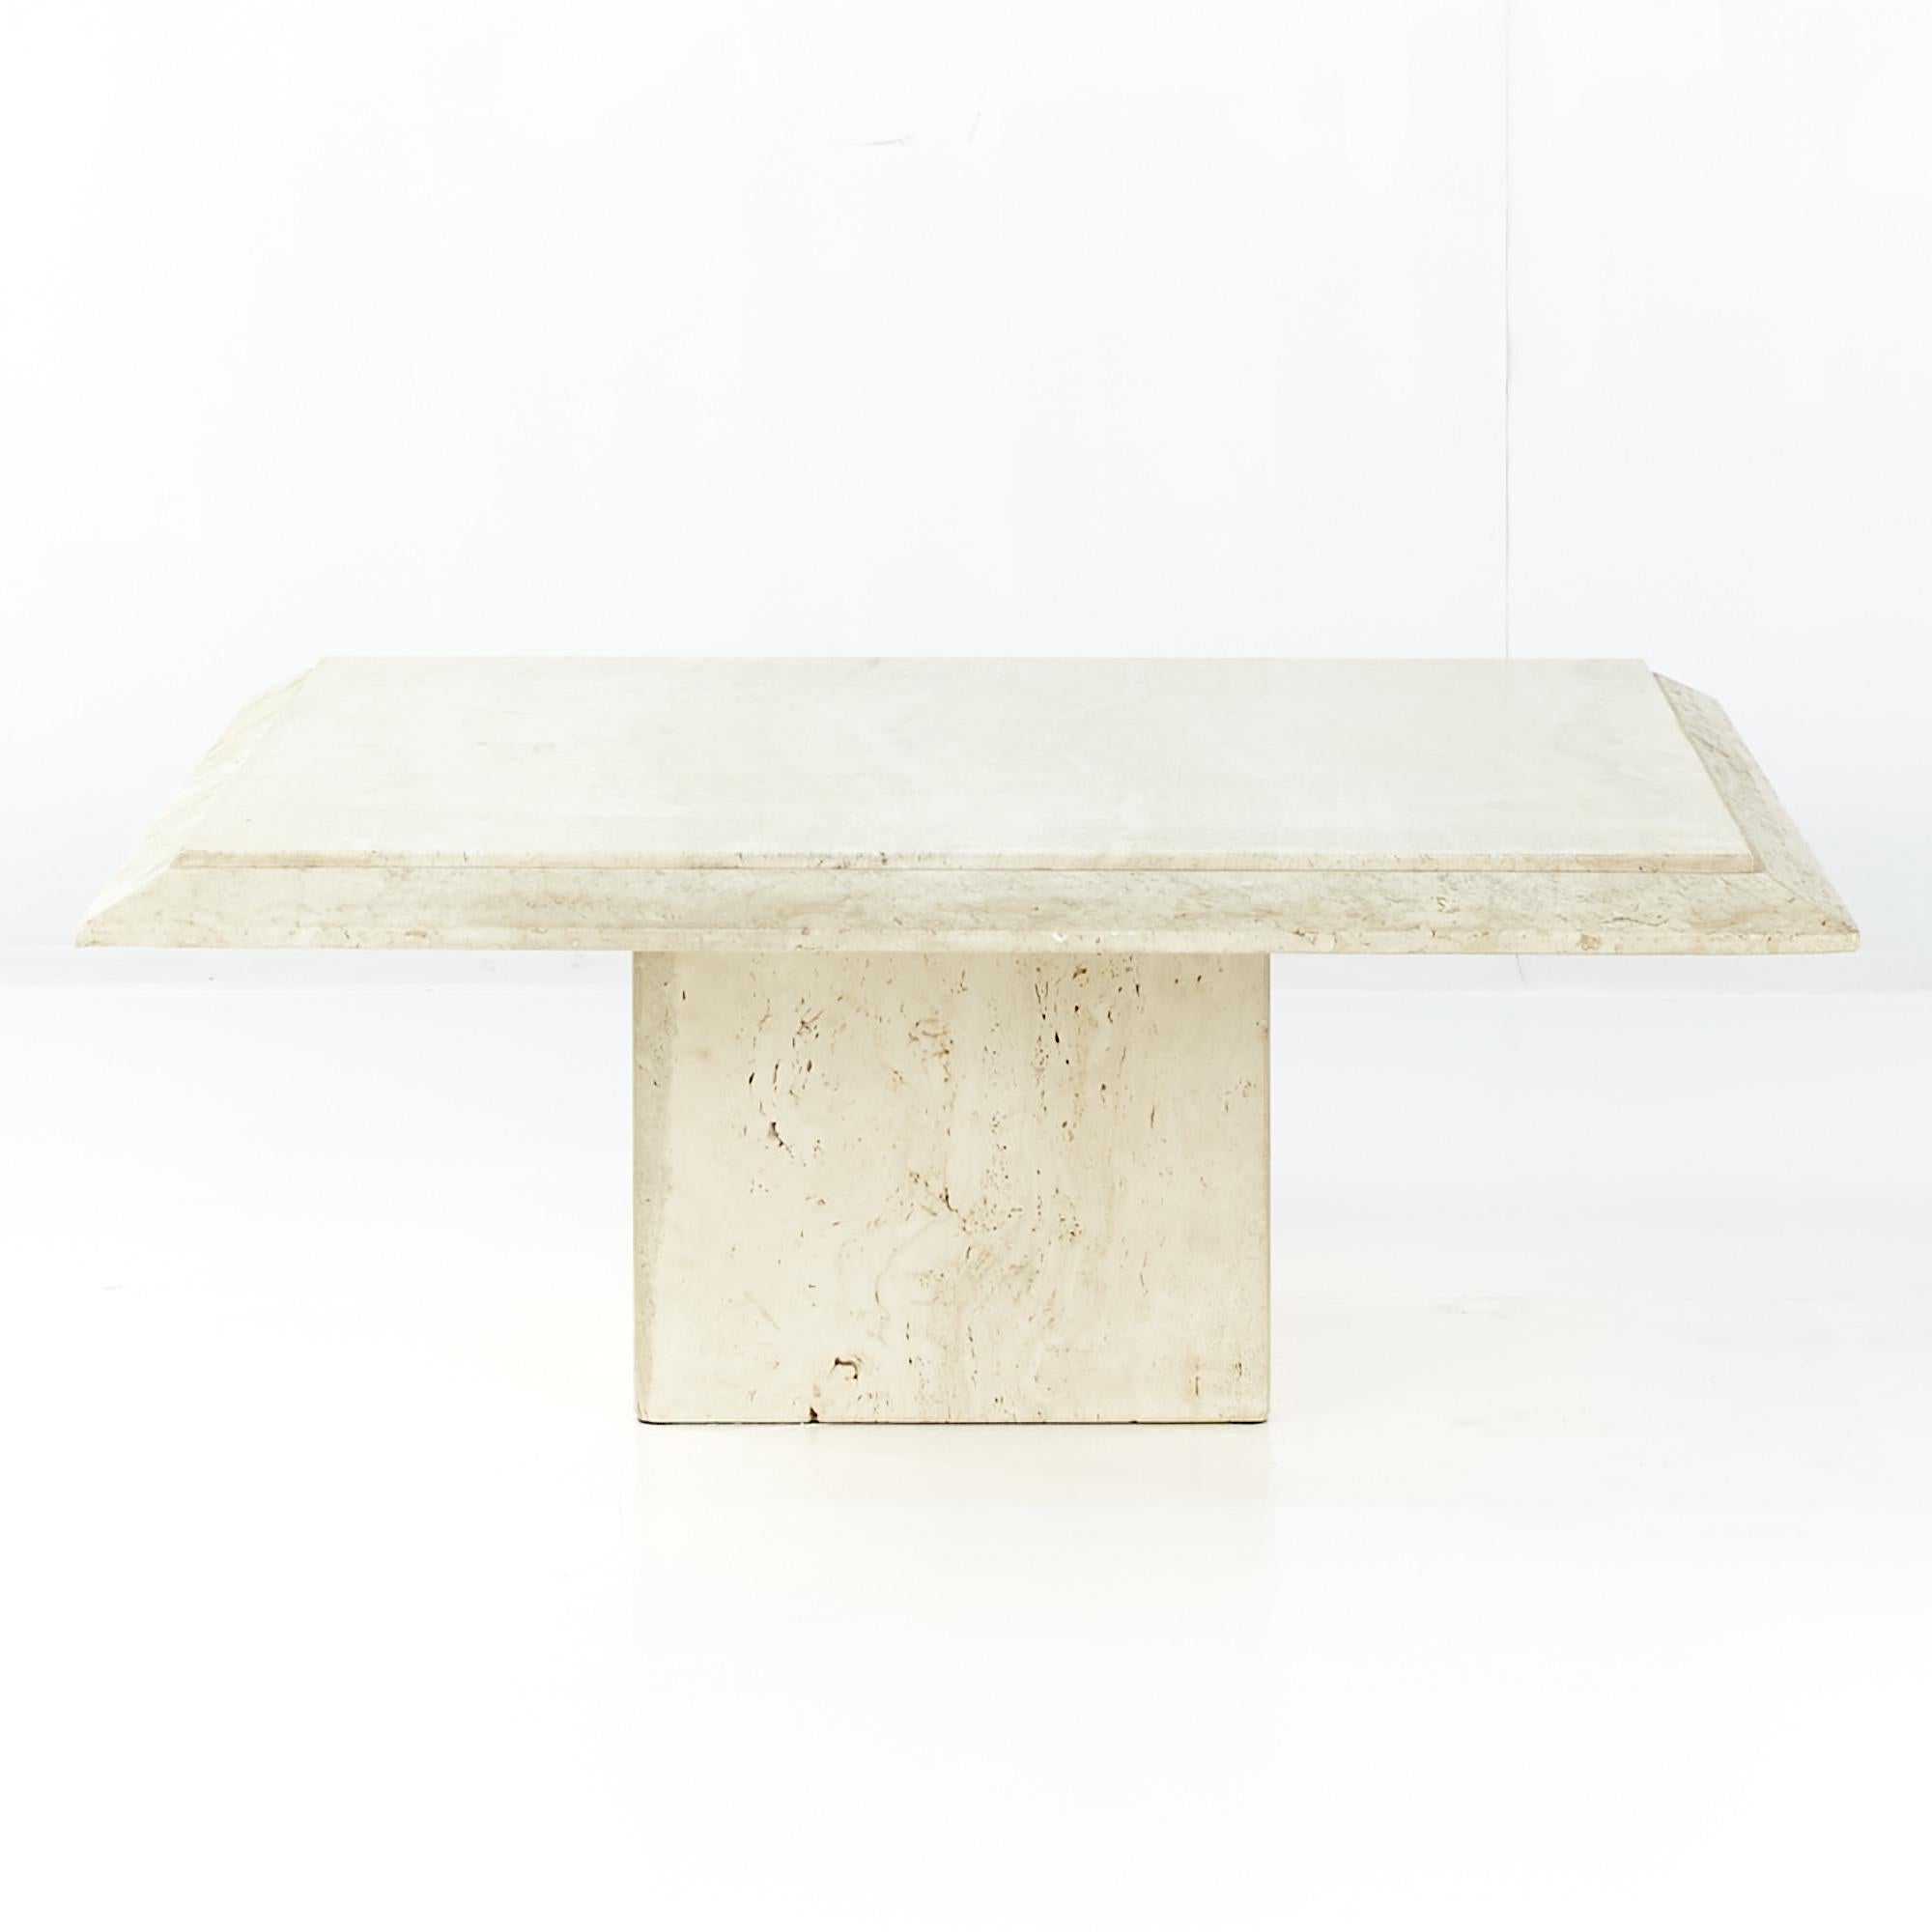 Mid Century Travertine Coffee Table

This table measures: 41.5 wide x 41.5 deep x 16 inches high

All pieces of furniture can be had in what we call restored vintage condition. That means the piece is restored upon purchase so it’s free of